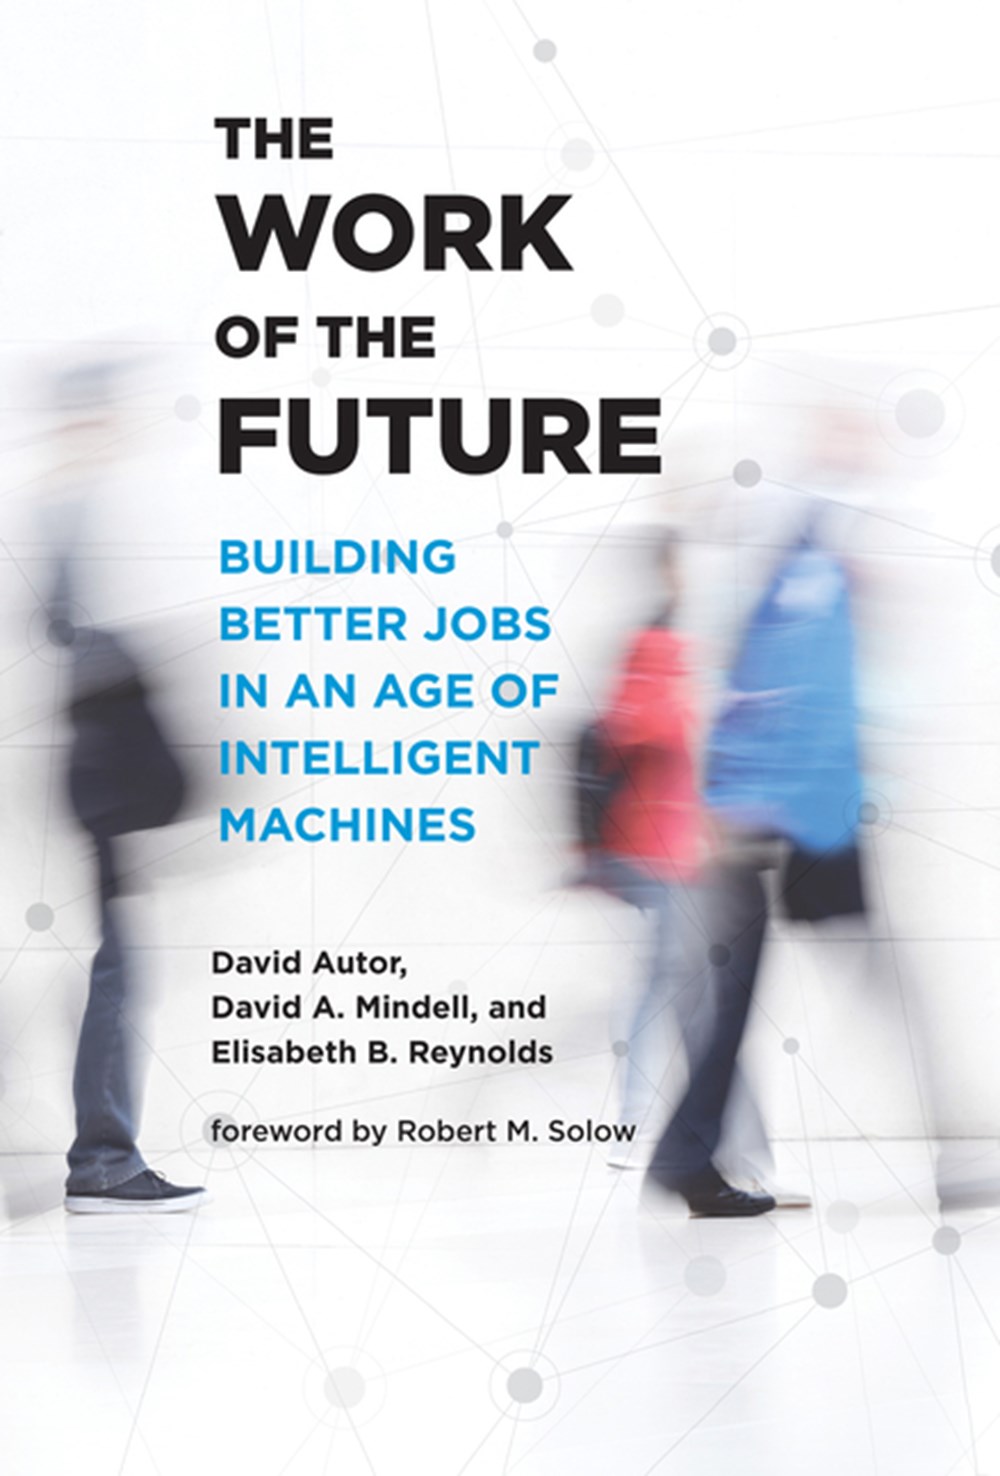 Work of the Future Building Better Jobs in an Age of Intelligent Machines